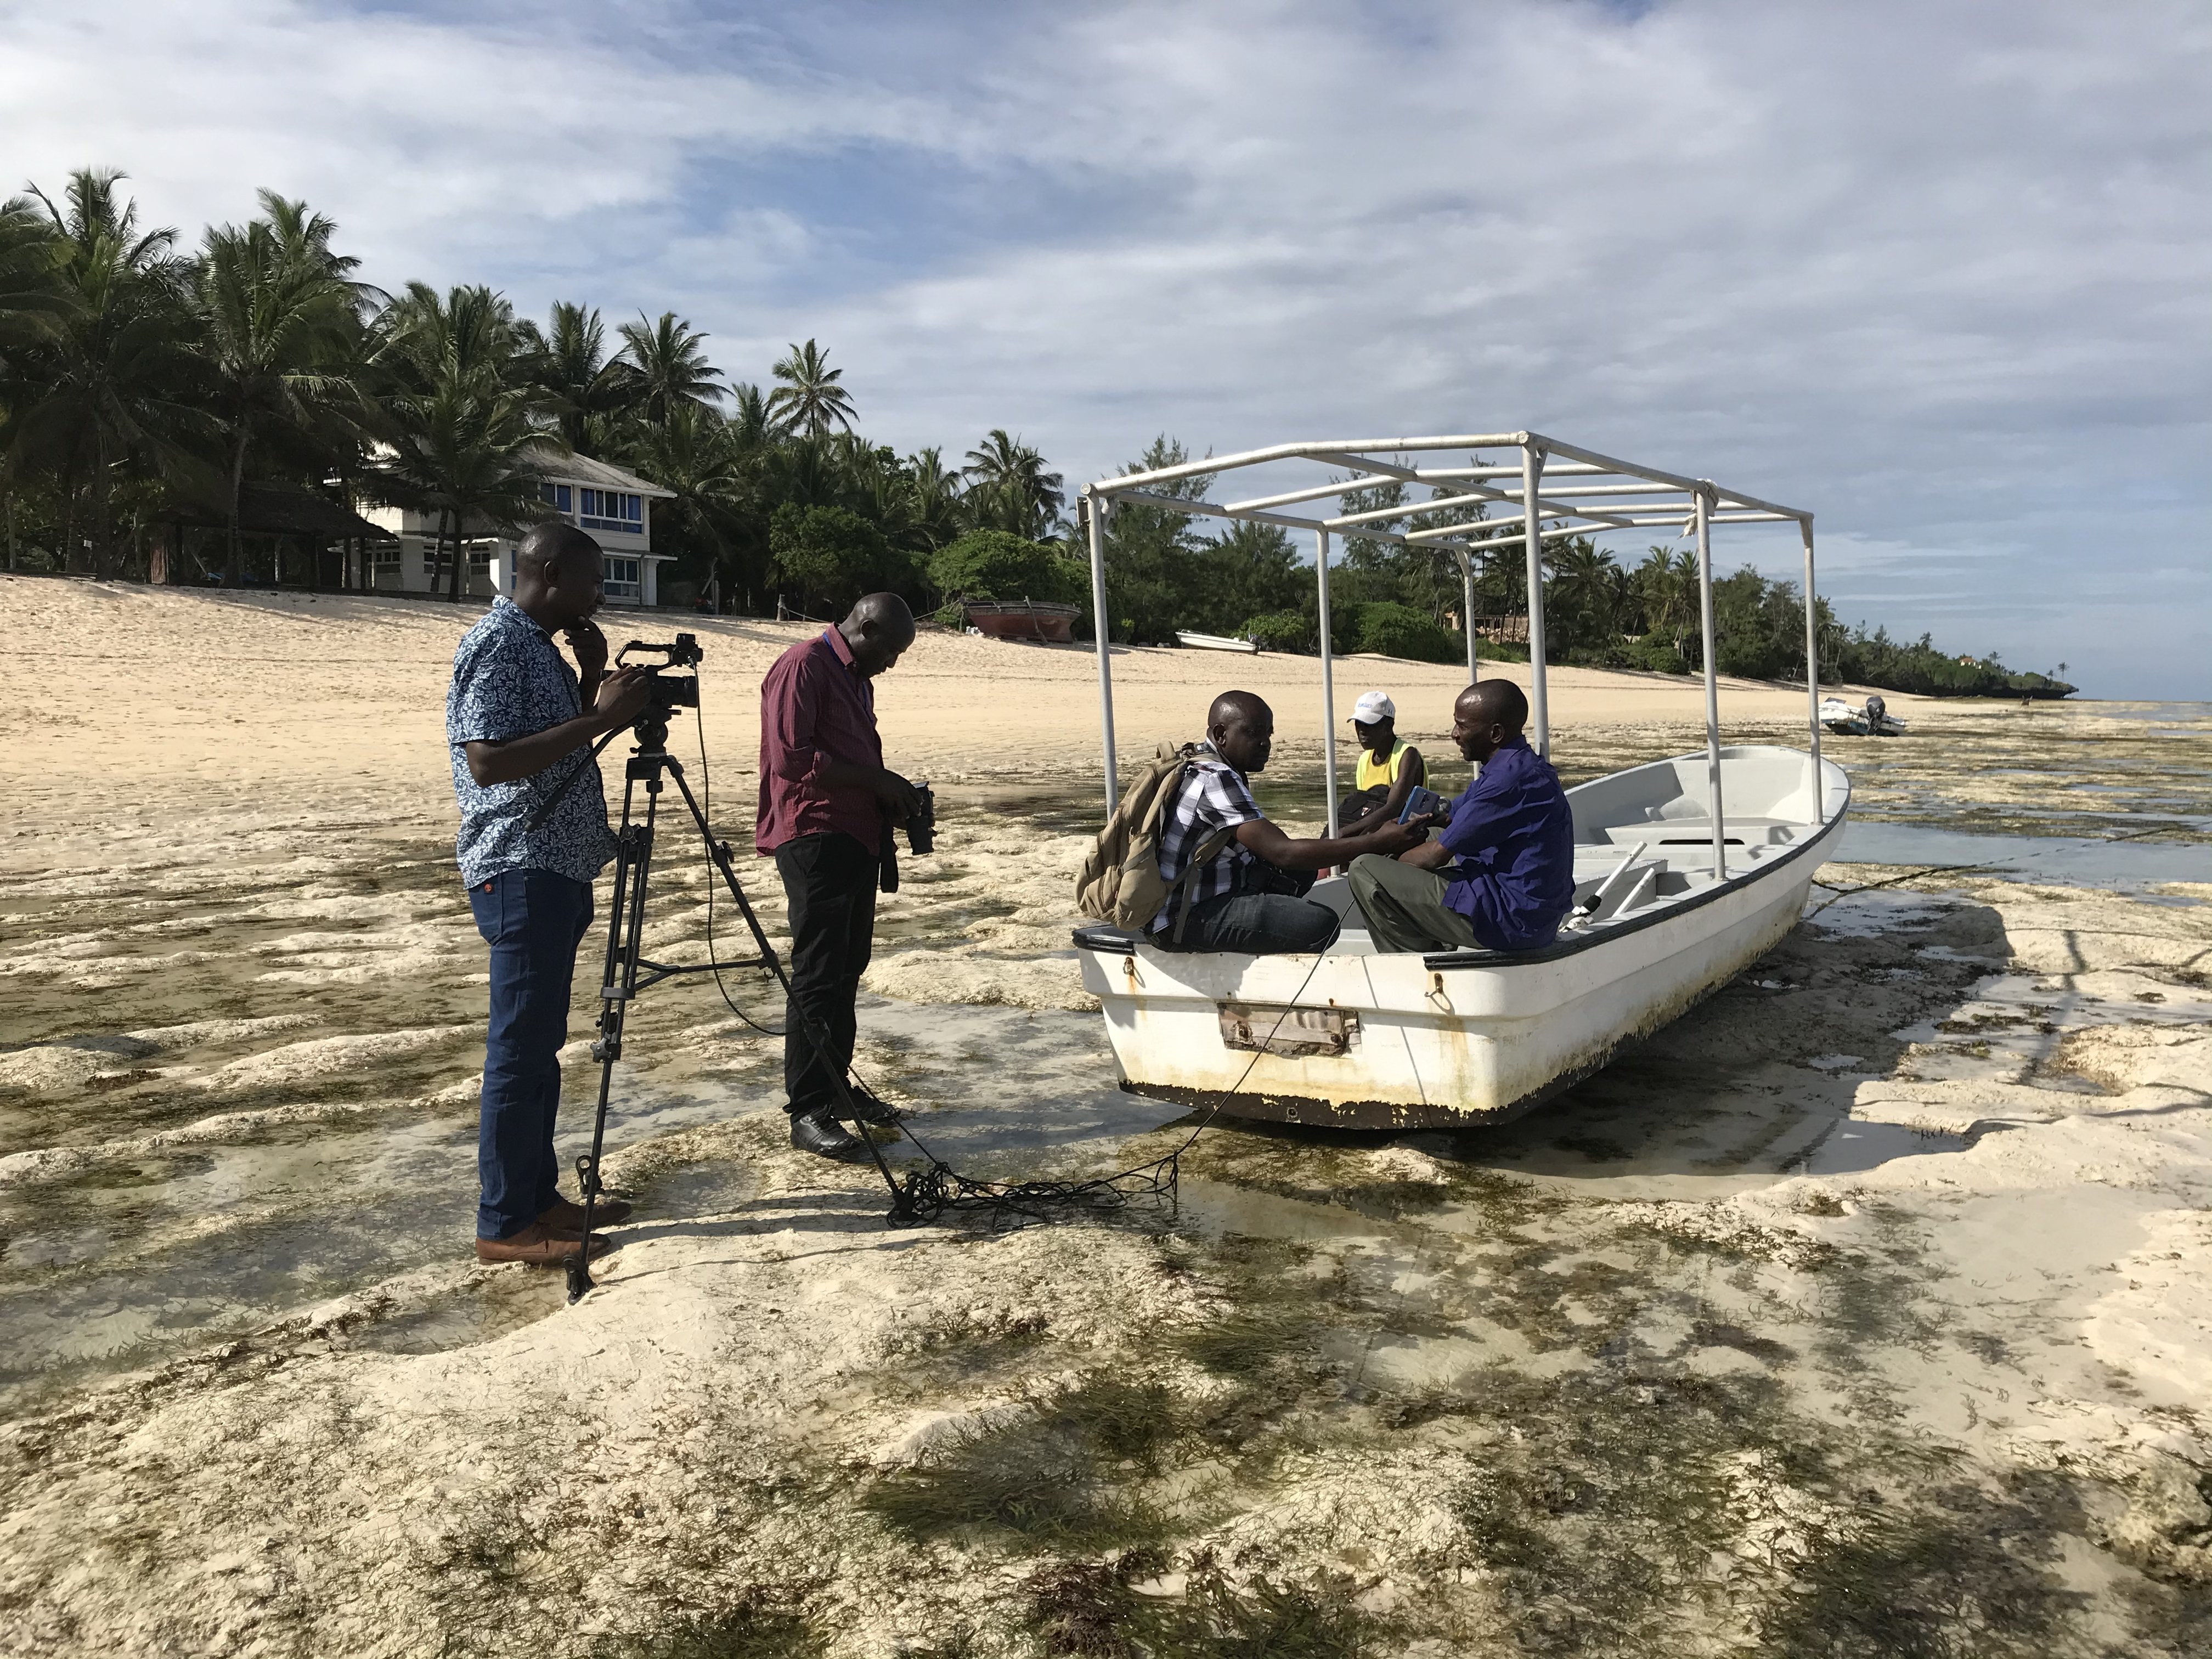 reporters interview men on a fishing boat on the beach